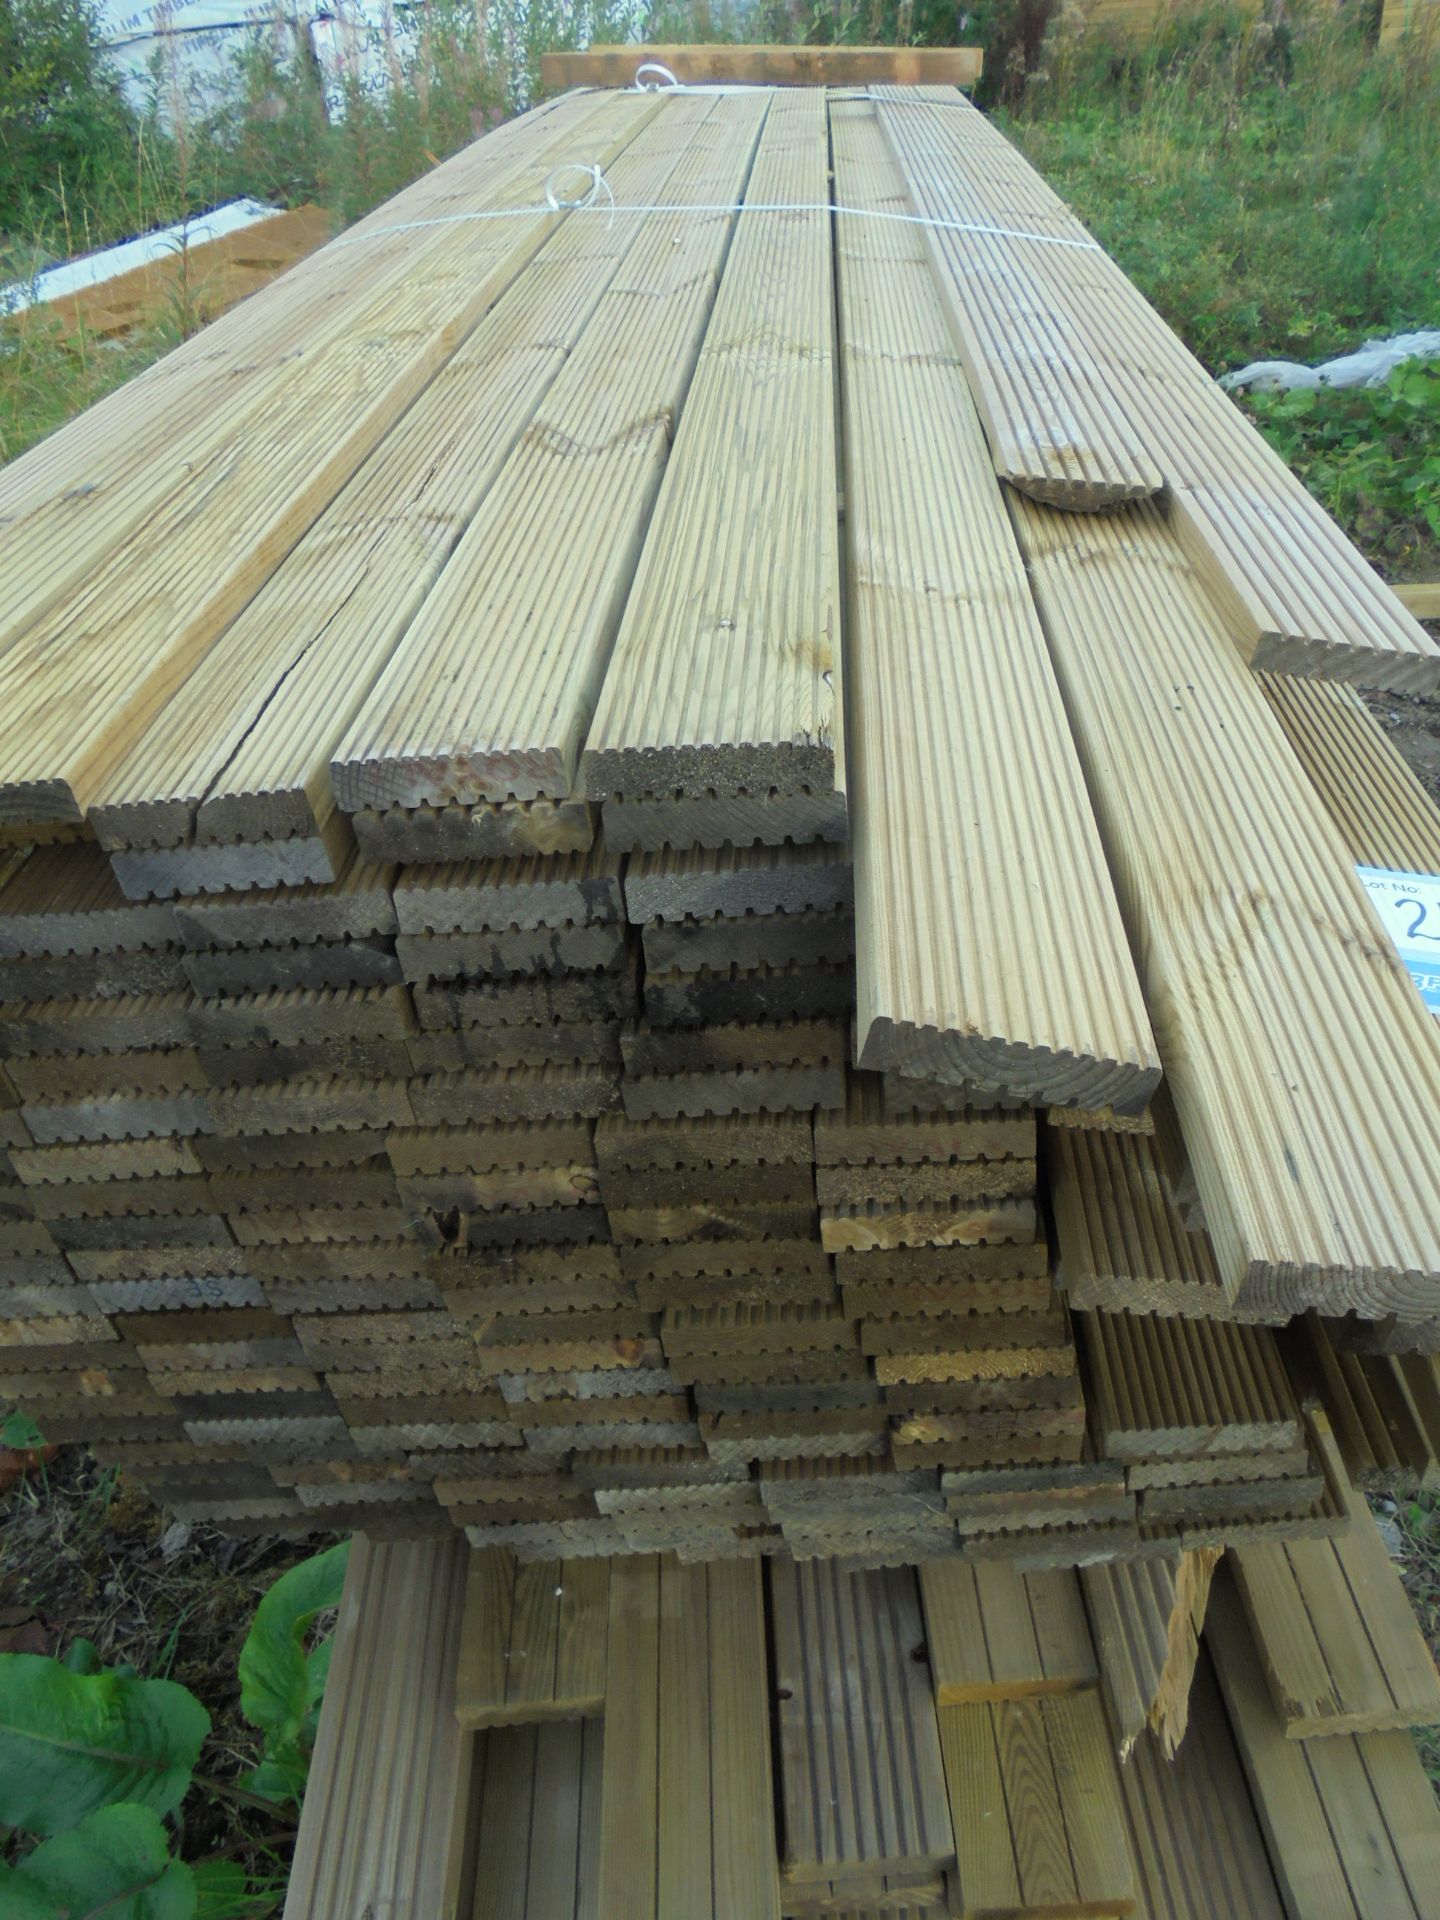 220 Lengths Decking Boards, 176 - 4800 x 125 x 32mm & 44 - 3300 x 125 x 32mm - Image 2 of 2